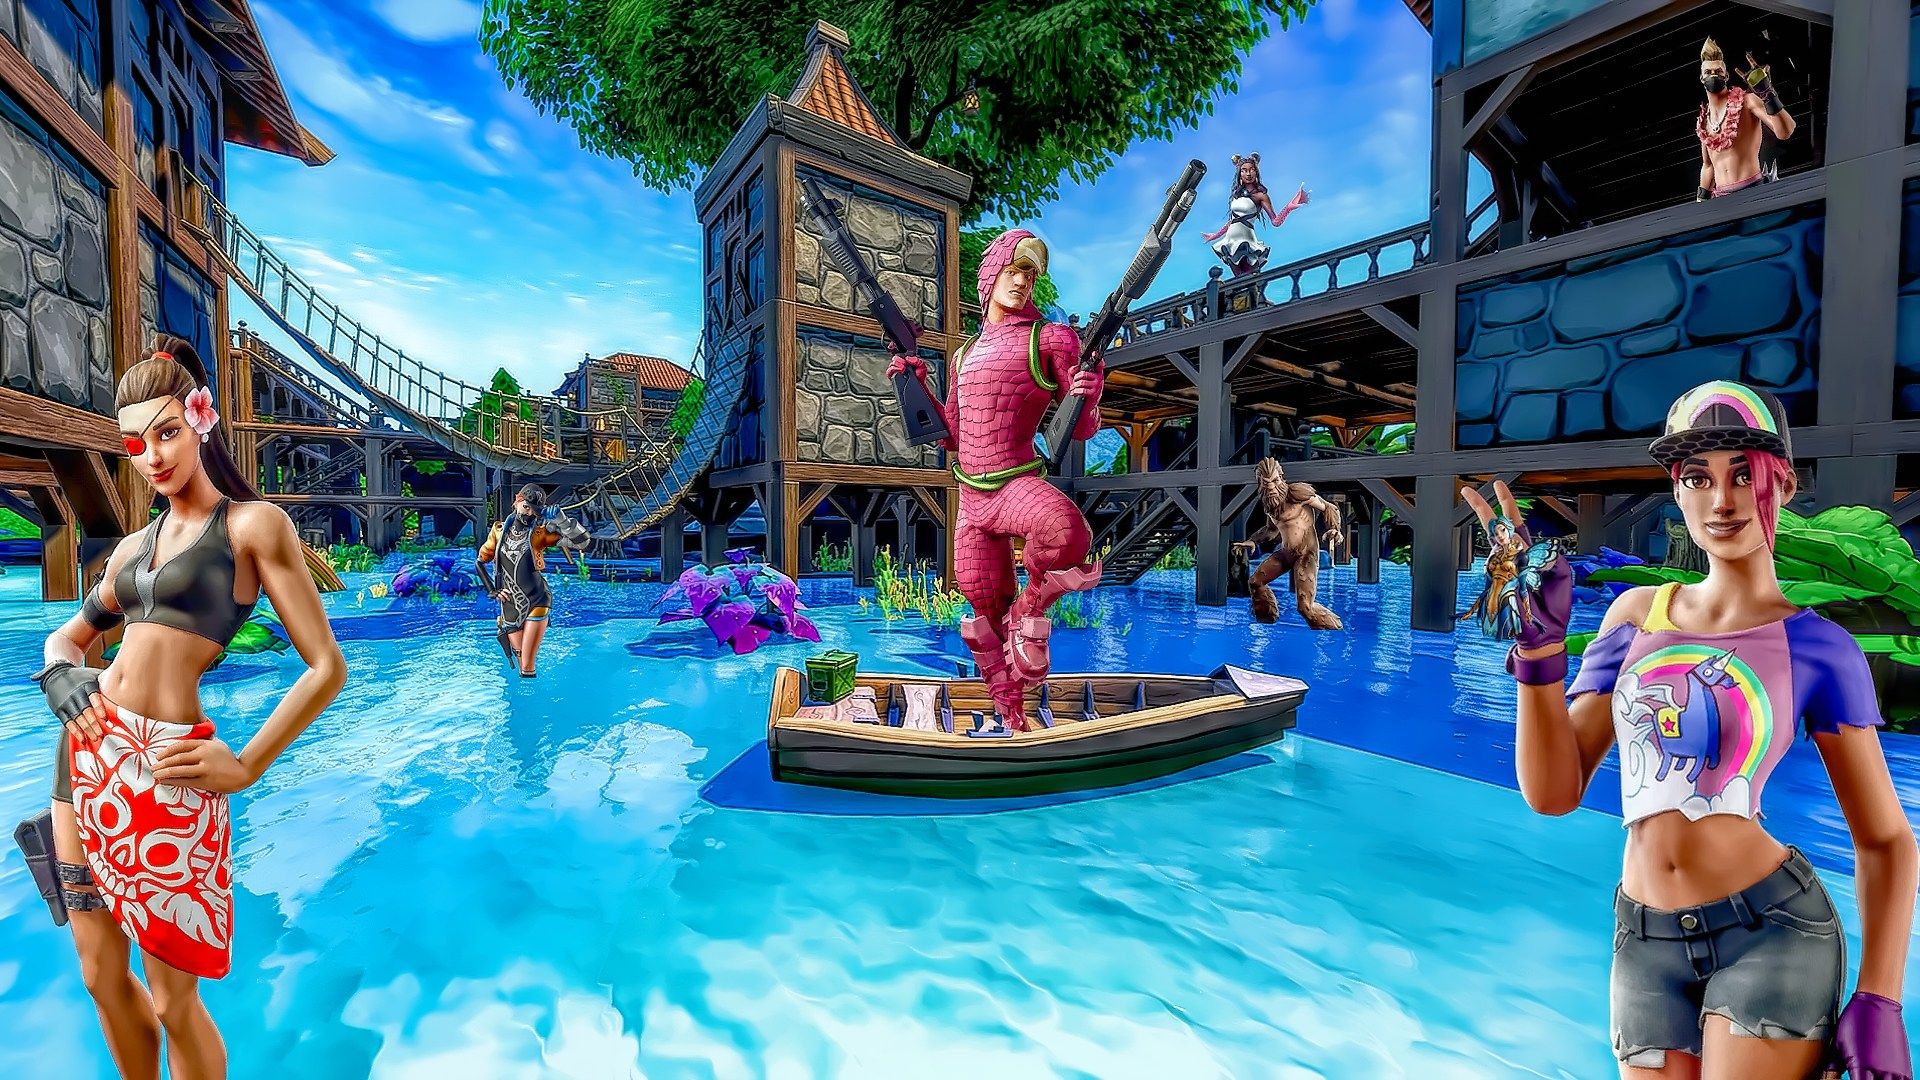 Fortnite 14 Days of Summer You Need To Know + Wallpaper!